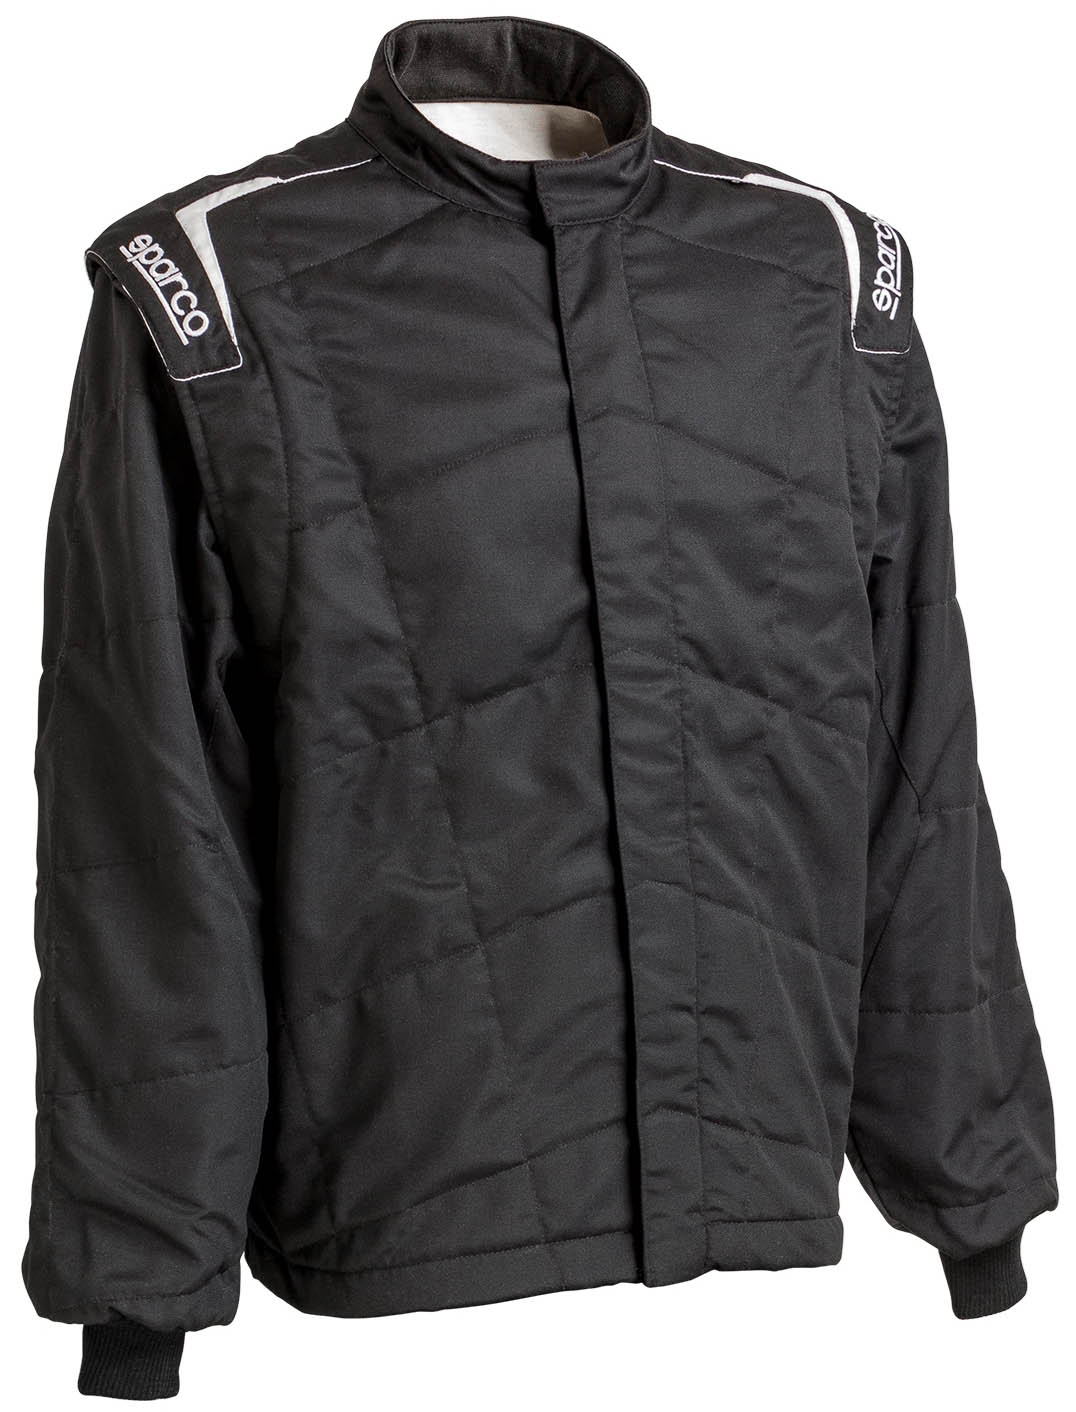 Sparco Sport Light Pro Racing Jackets